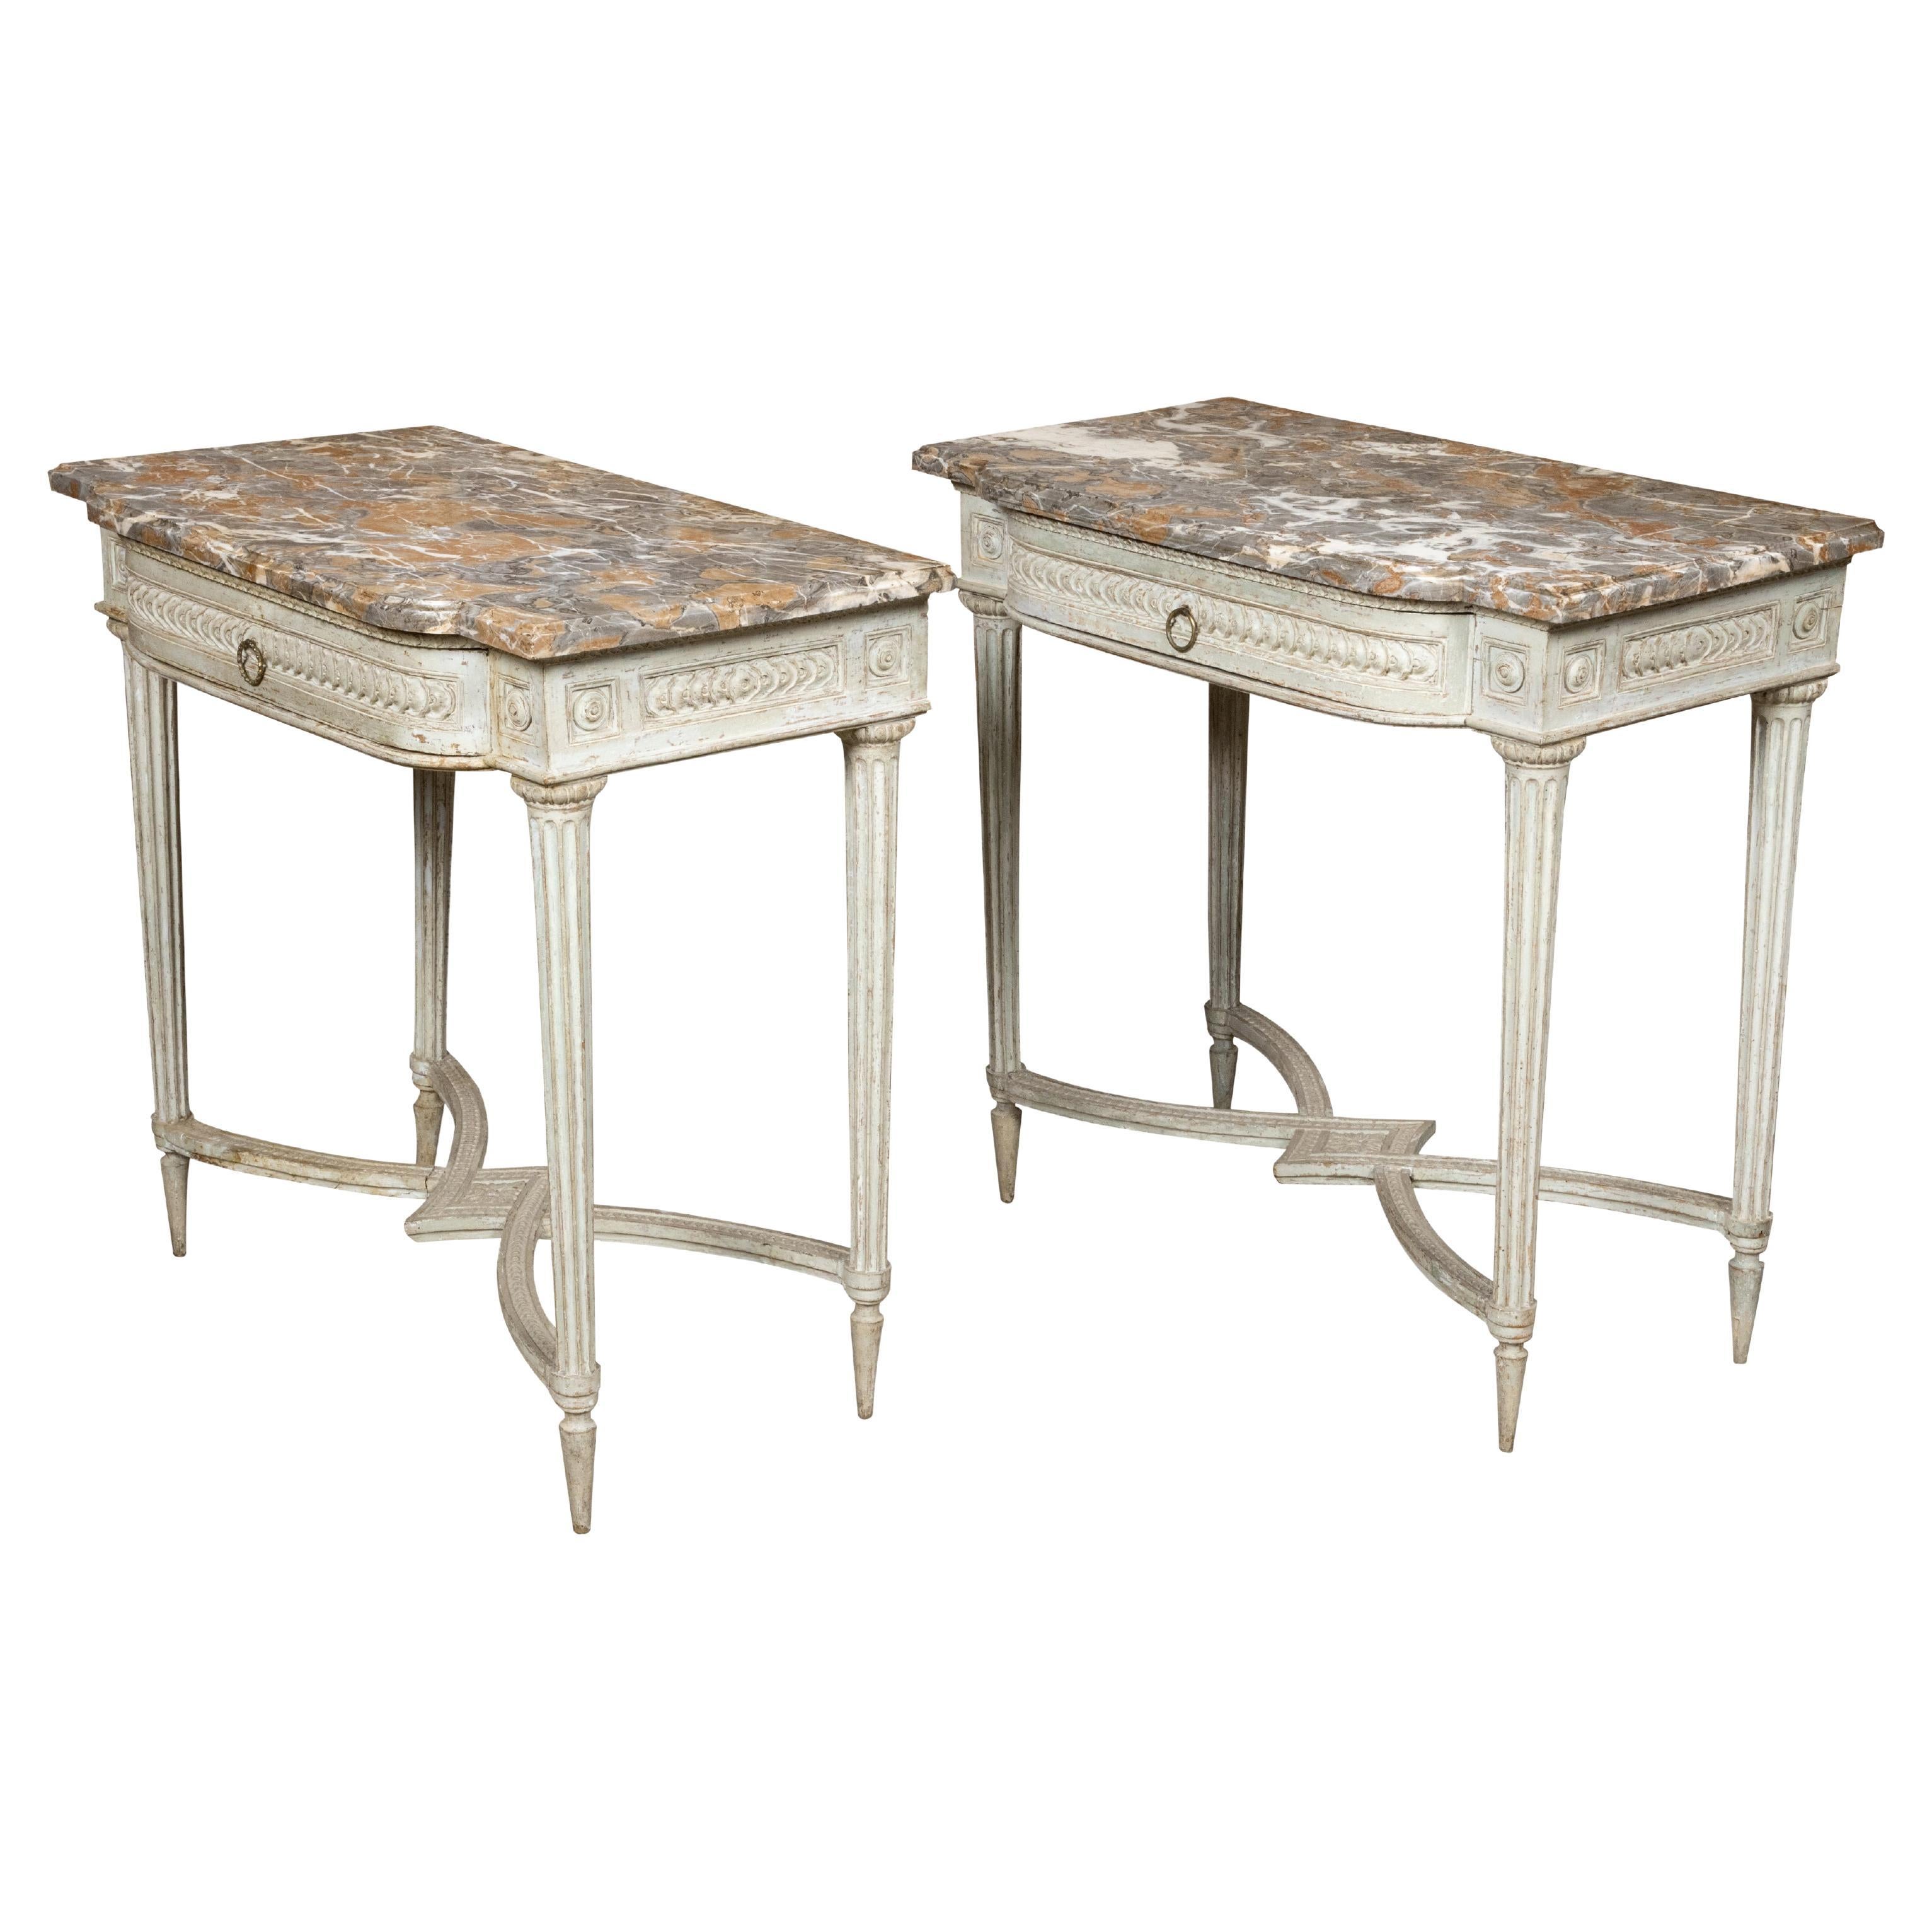 Pair of French Louis XVI 18th Century Painted Console Tables with Marble Tops For Sale